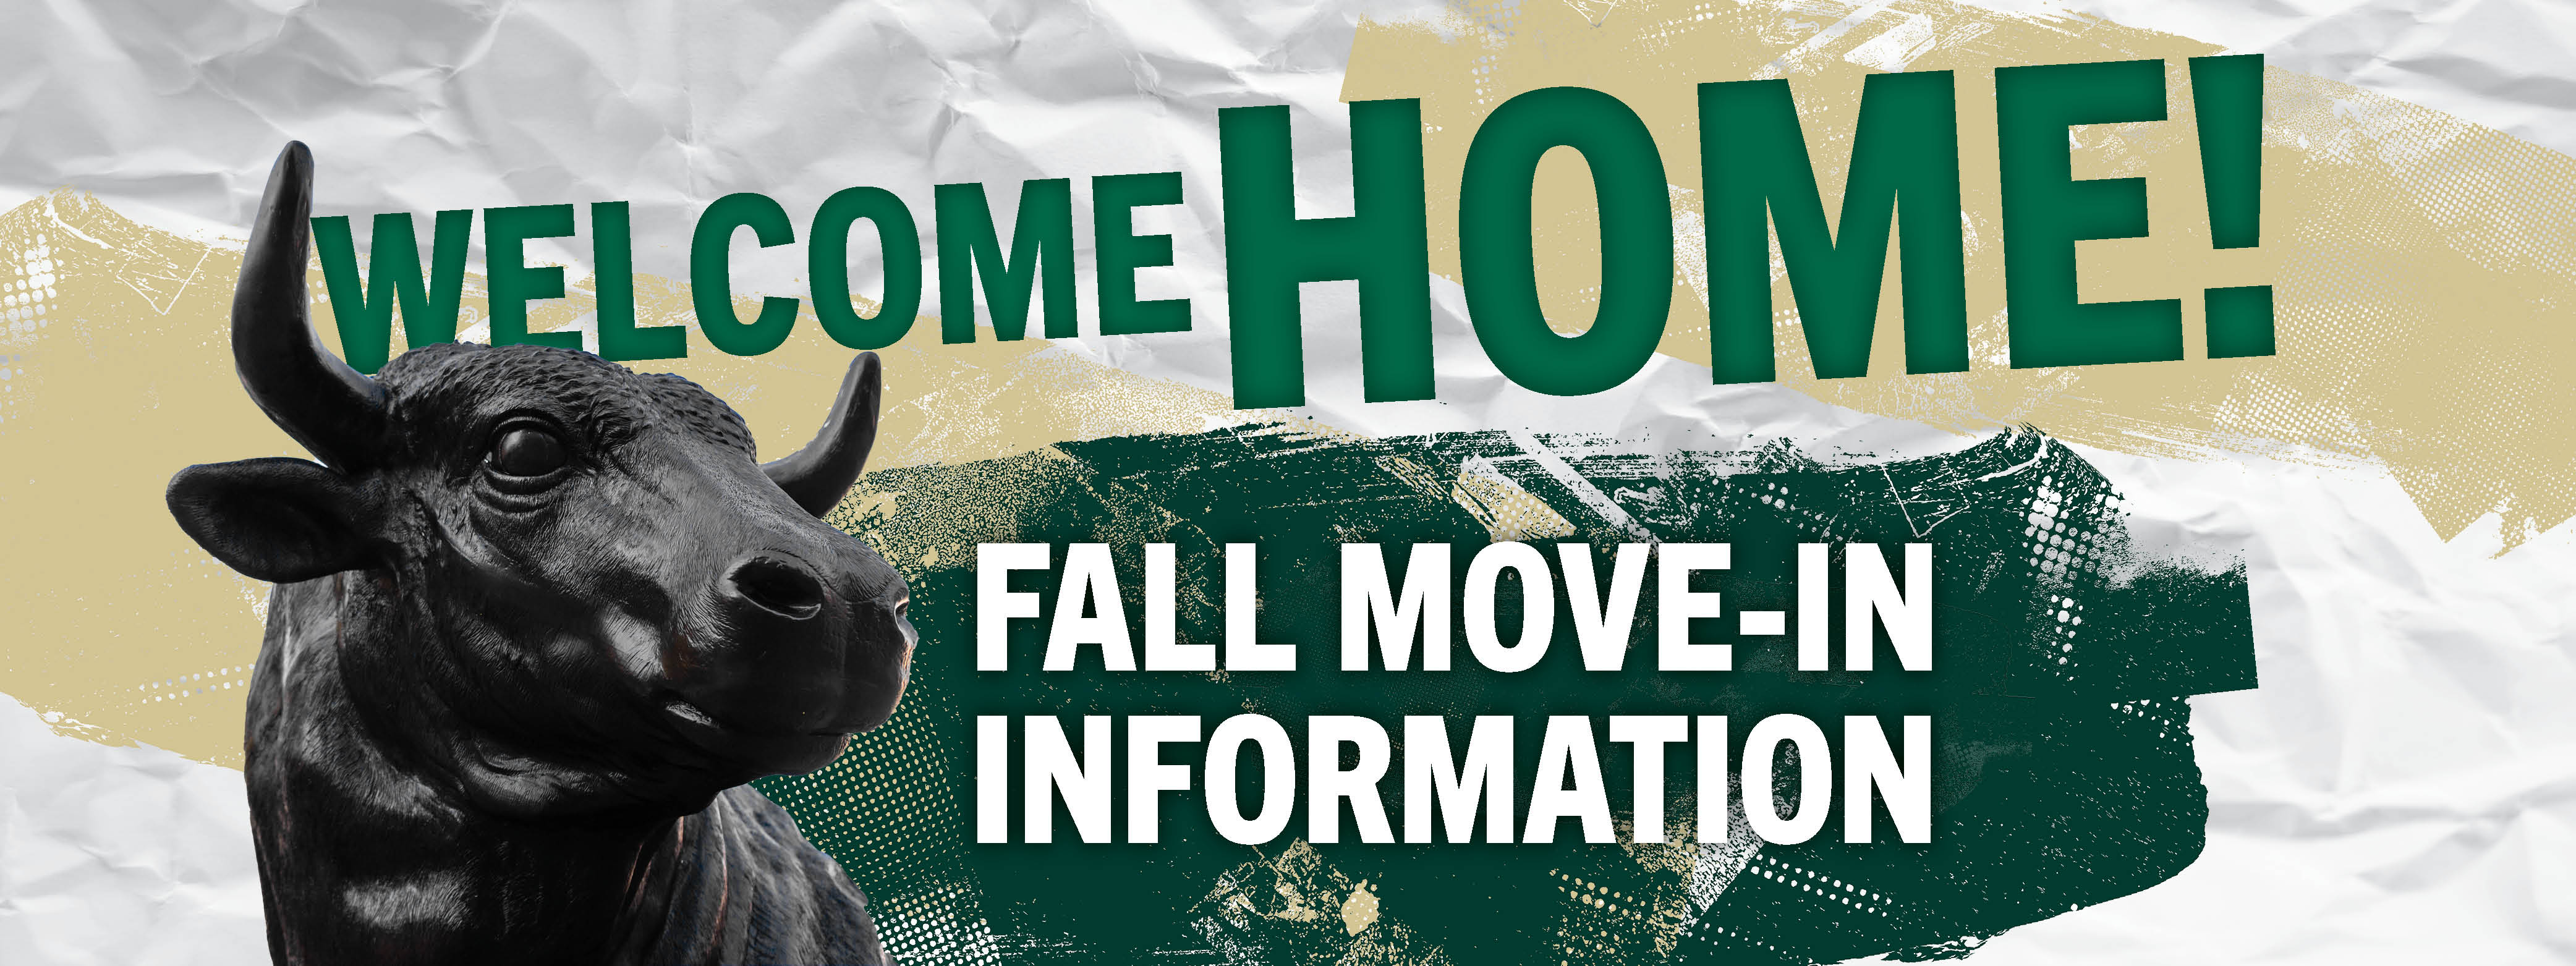 Welcome Home! Fall Move-in Information